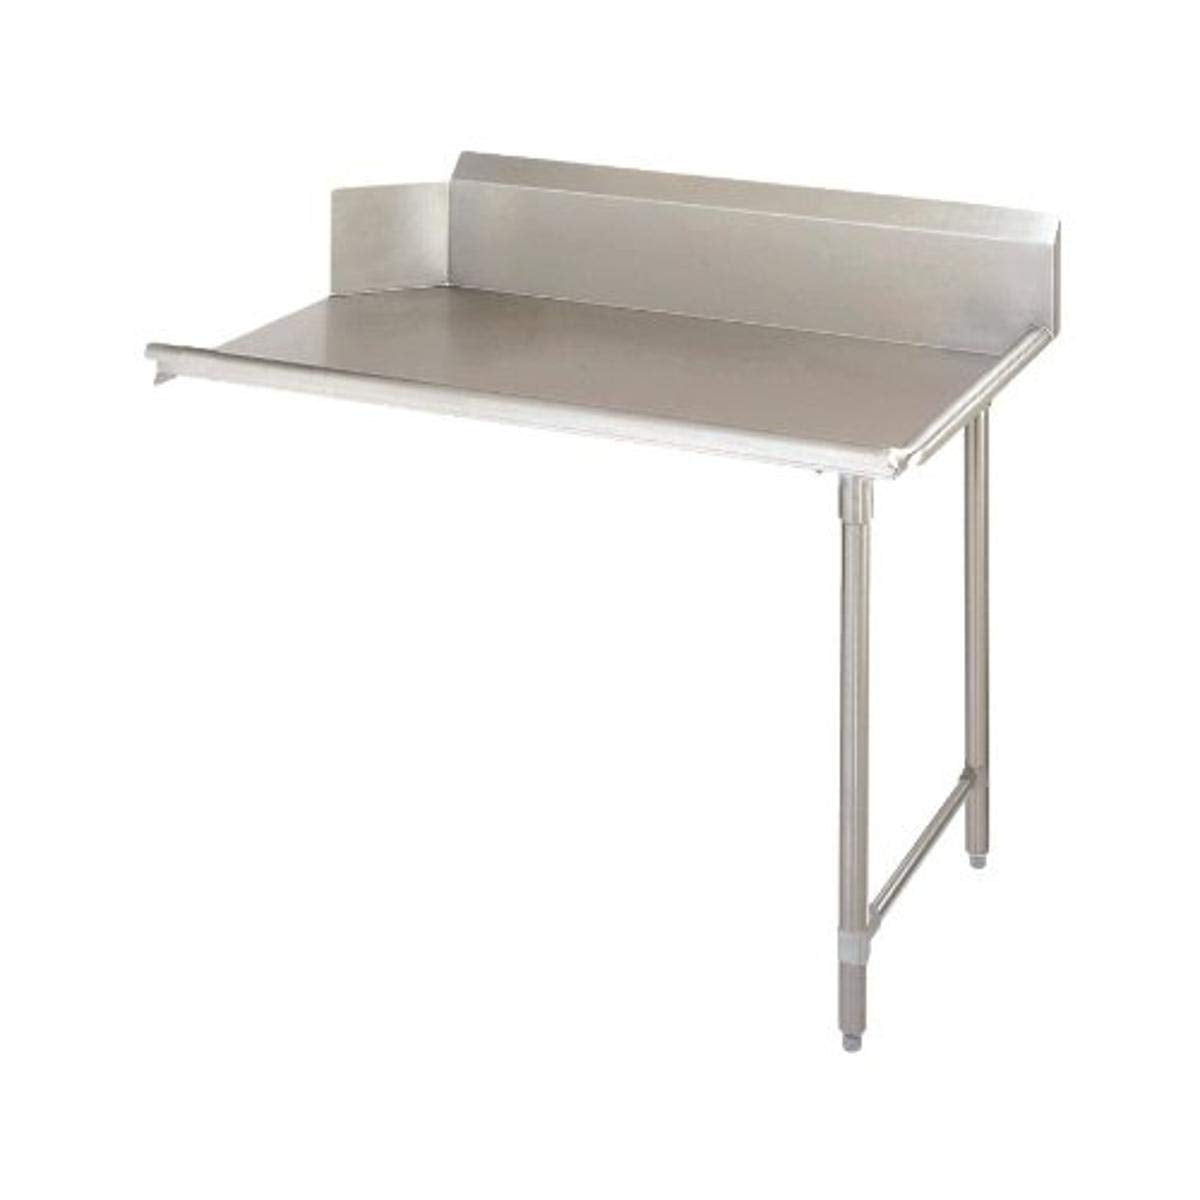 John Boos JDTC-20-36R Stainless Steel Straight Pro-Bowl Clean Dishtable, 36" Length x 30" Width, Right Hand Side